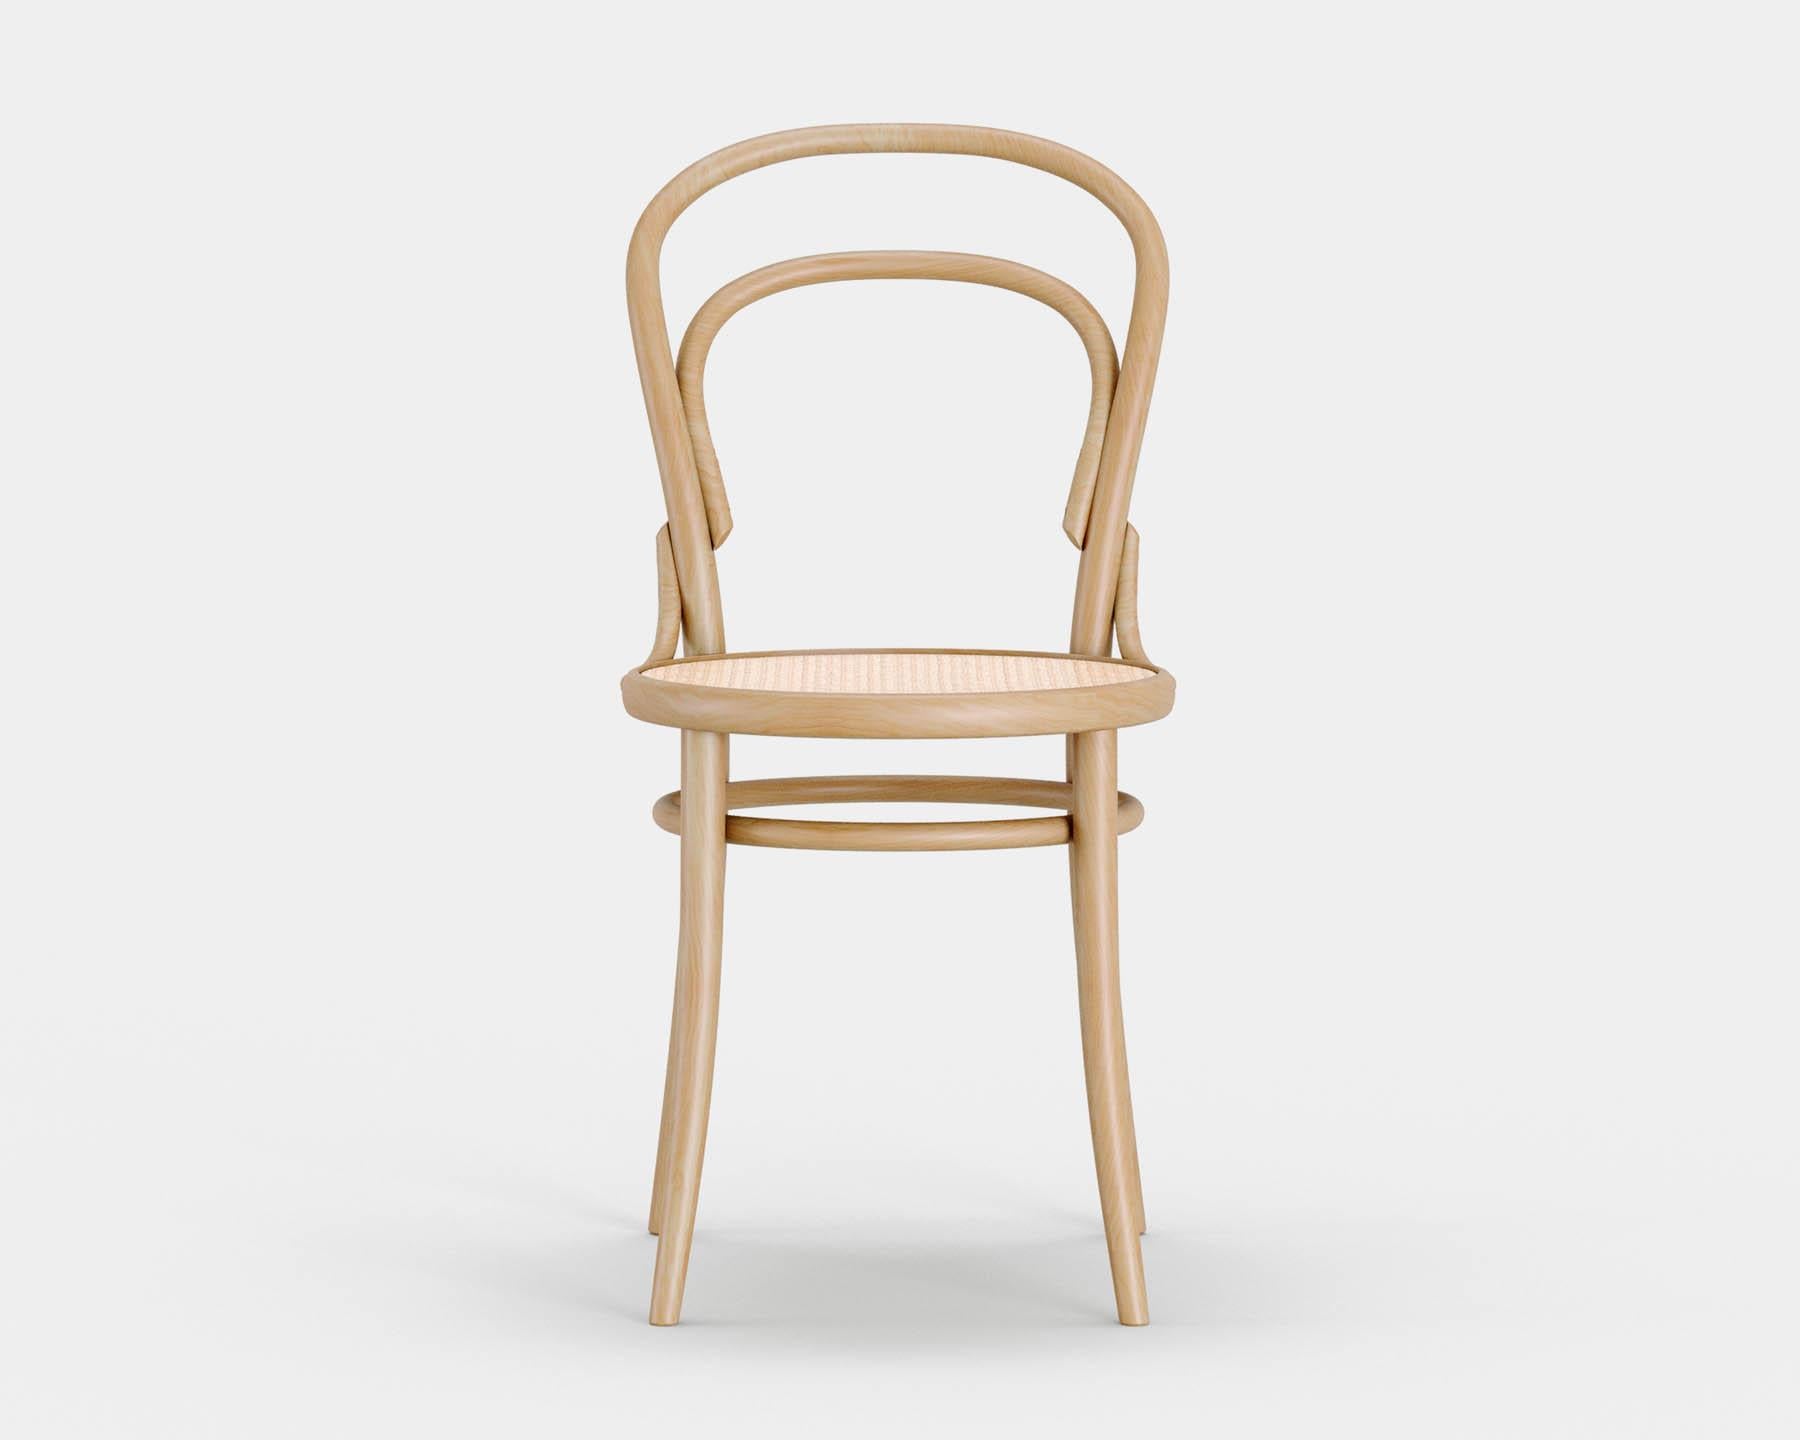 Chair No. 14
Iconic bistro chair conceived by Michael Thonet in 1869, now produced in the same manufacture in Czech Republic by TON. 

Wood: solid beech 
Finish: natural light 
Seat: can seat.

--
Chair no. 14 by TON is one of the oldest,